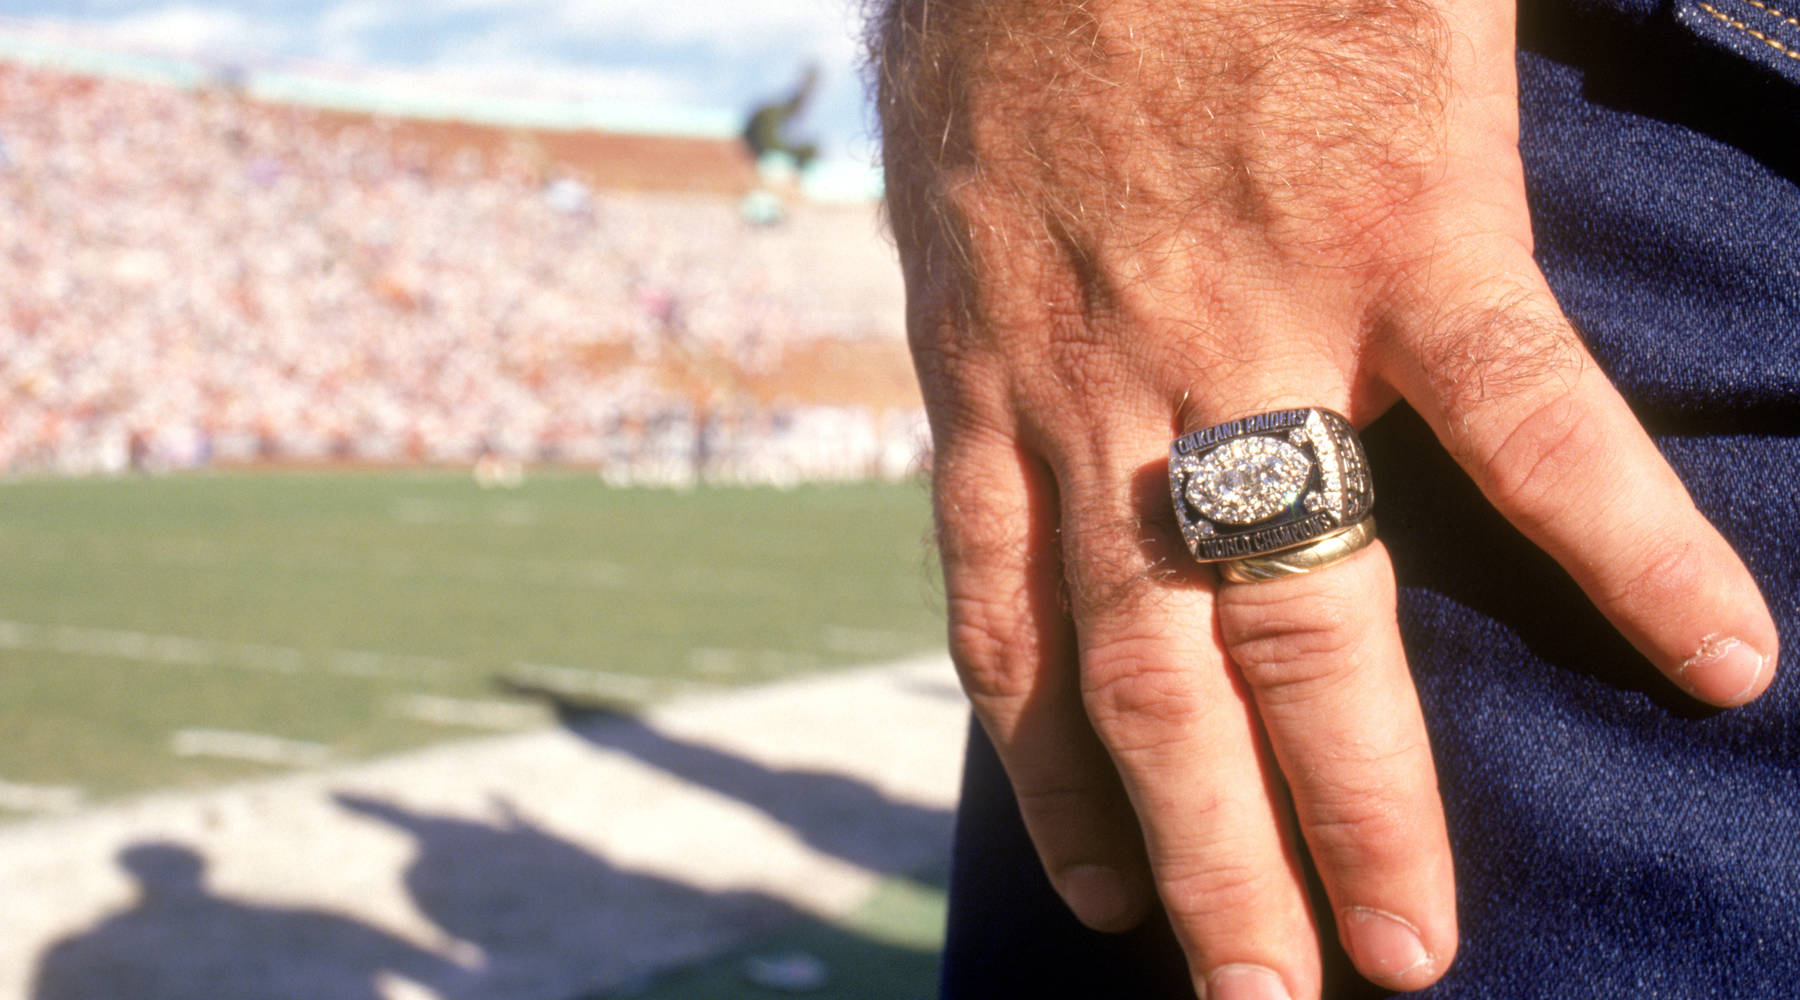 Super Bowl ring up for auction - Marketplace